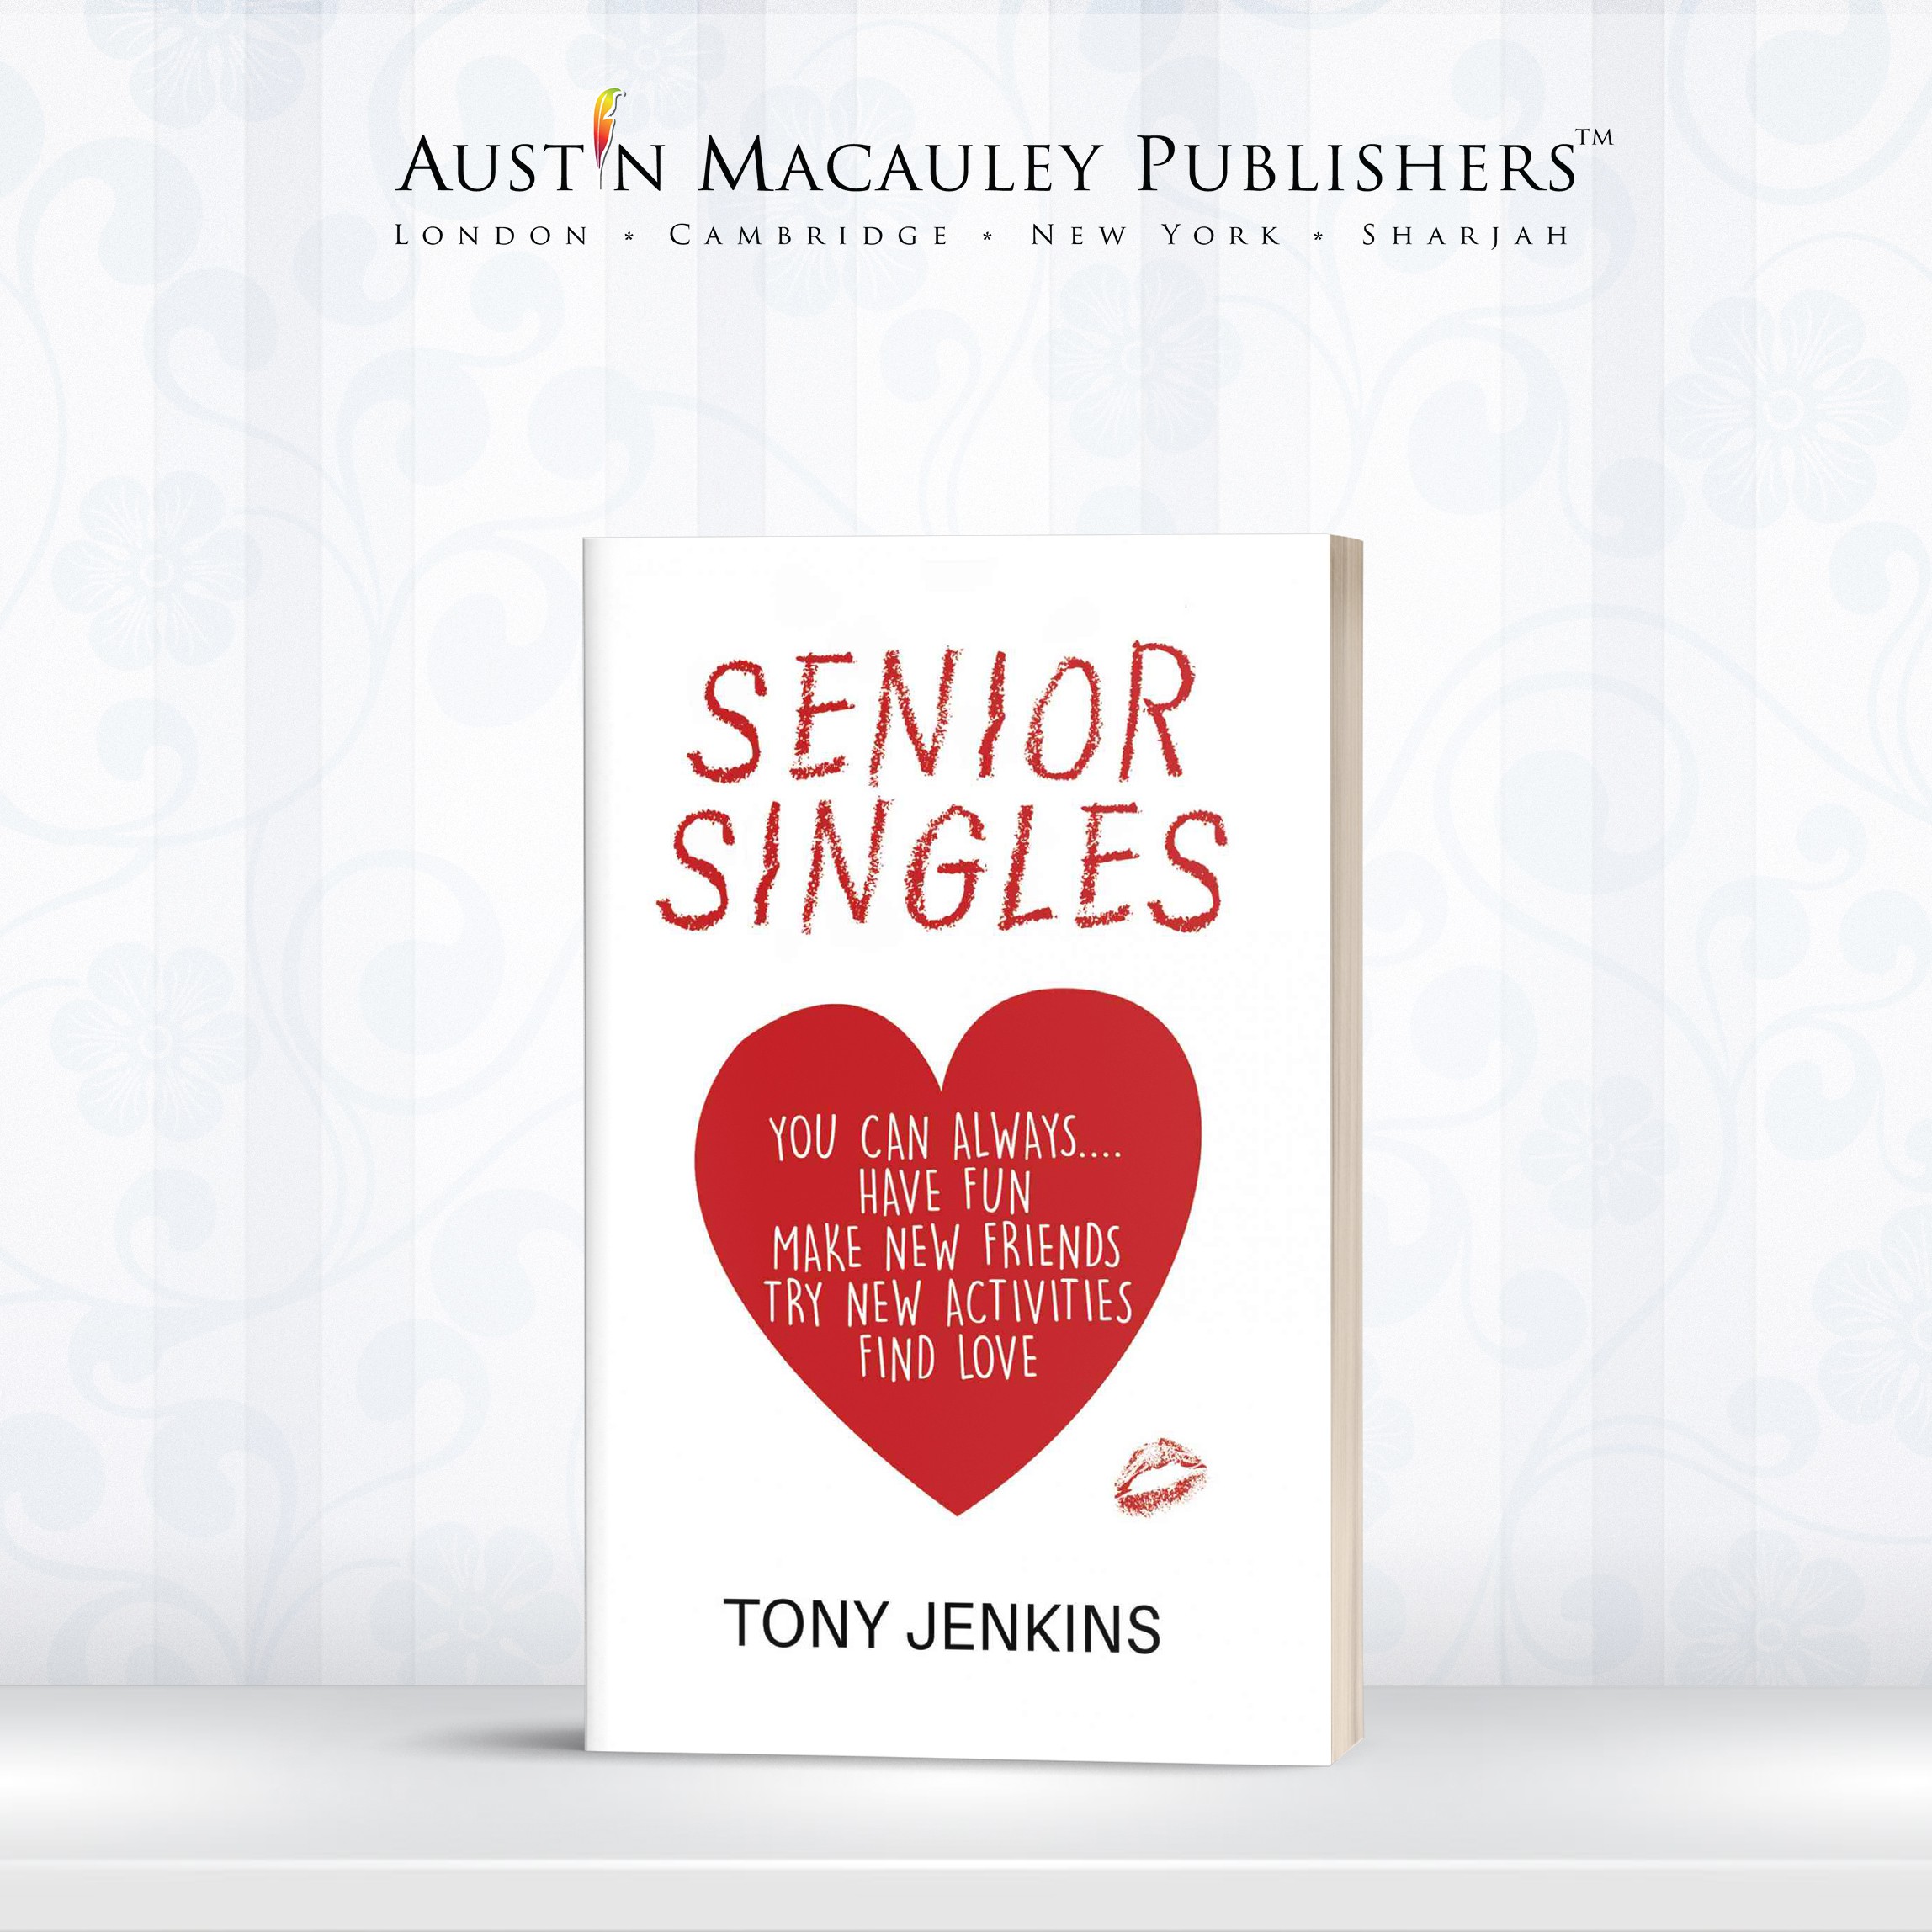 Tony Jenkins’ Book Senior Singles Received A Raving Review